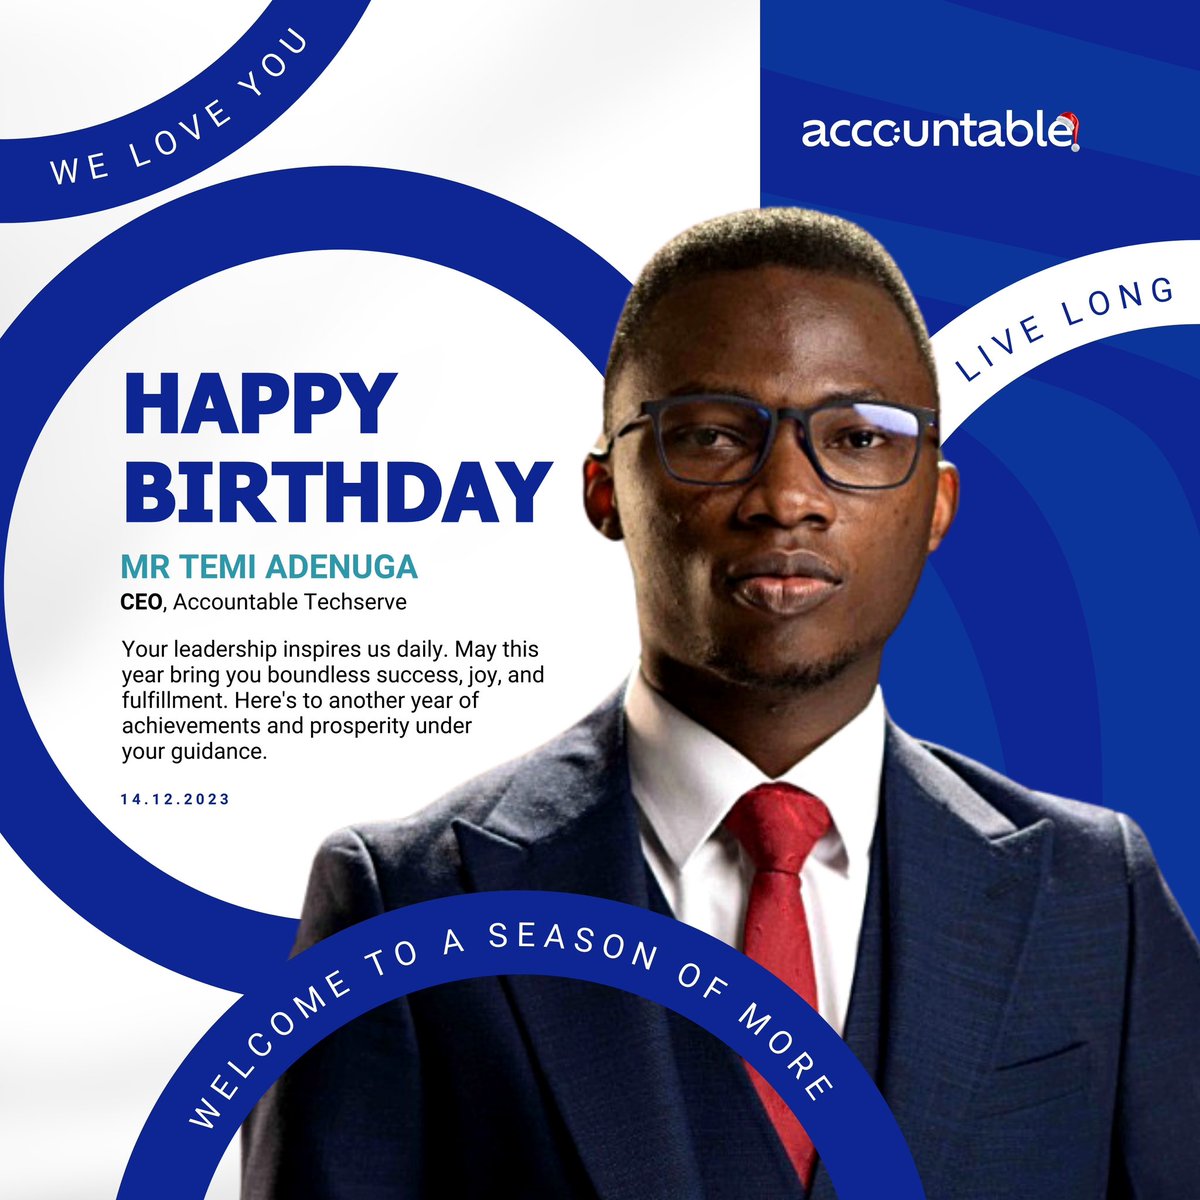 Another year wiser, another candle on the calculator! Happy Birthday to the brain behind Accountable Techserve, our fearless founder @temi_adenuga 🎂✨ May your days be as balanced as the best business books and as prosperous as a tax refund. Cheers to turning numbers into a